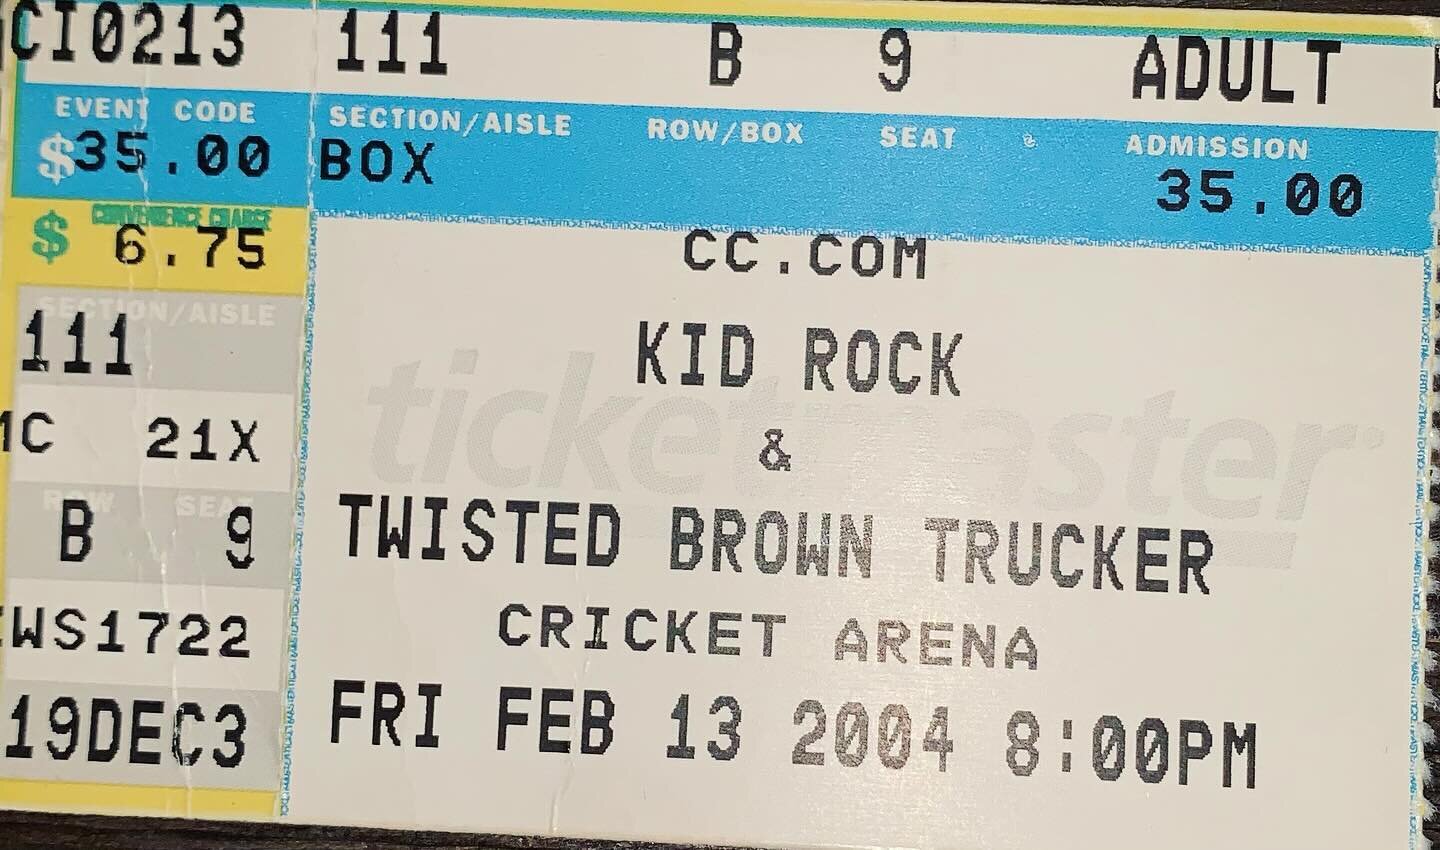 Hey @kidrock! You gotta share a beer with me and @rbrodof16 at the Anderson, SC @rockthecountry show. 

Saw you 20 years ago!!!